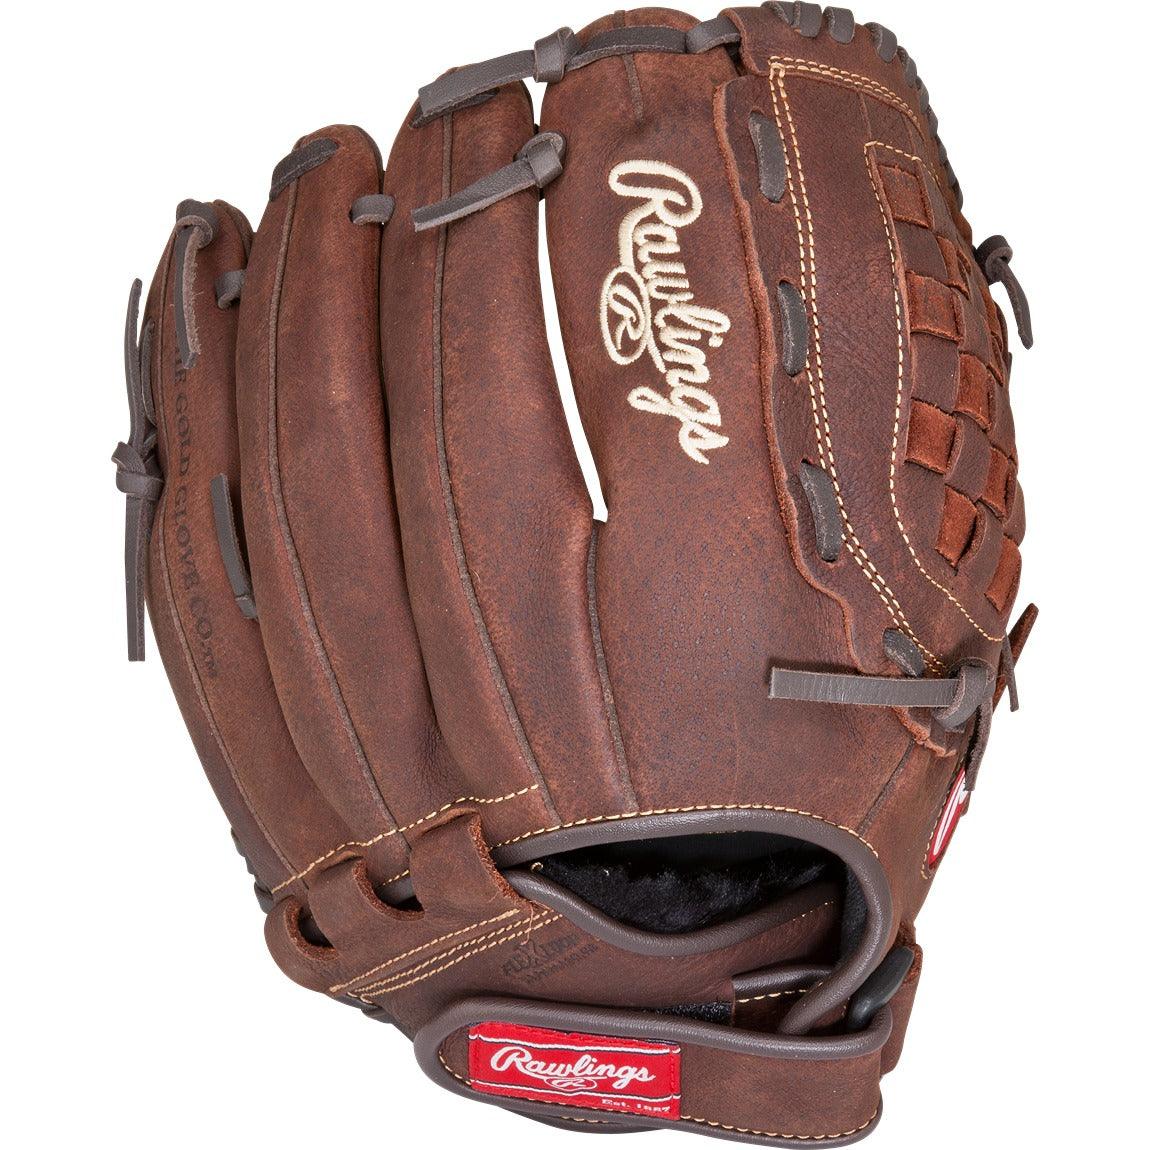 Player Preferred 12" Adult Softball Glove - Sports Excellence